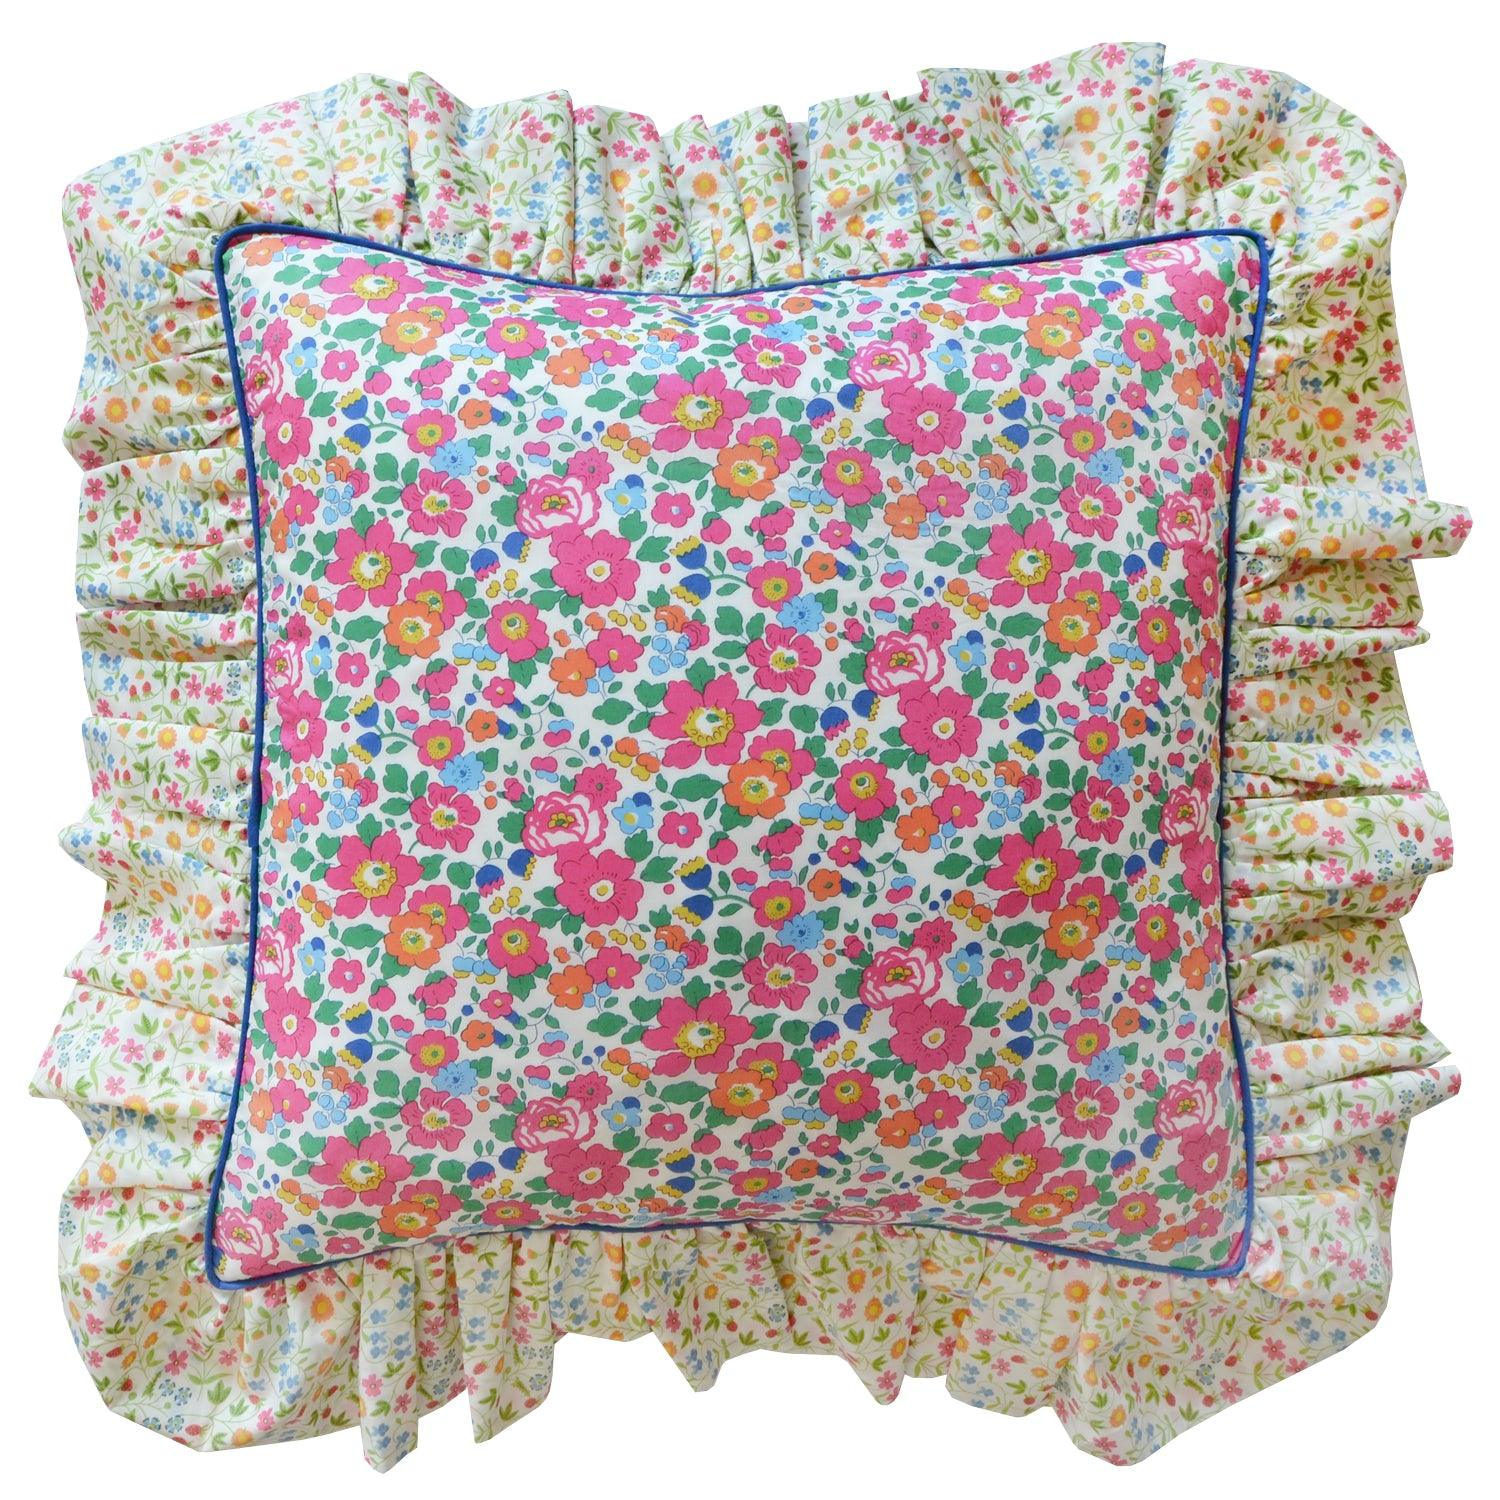 Ruffle Piped Cushion made with Liberty Fabric BETSY DEEP PINK & LITTLE MIRABELLE - Coco & Wolf